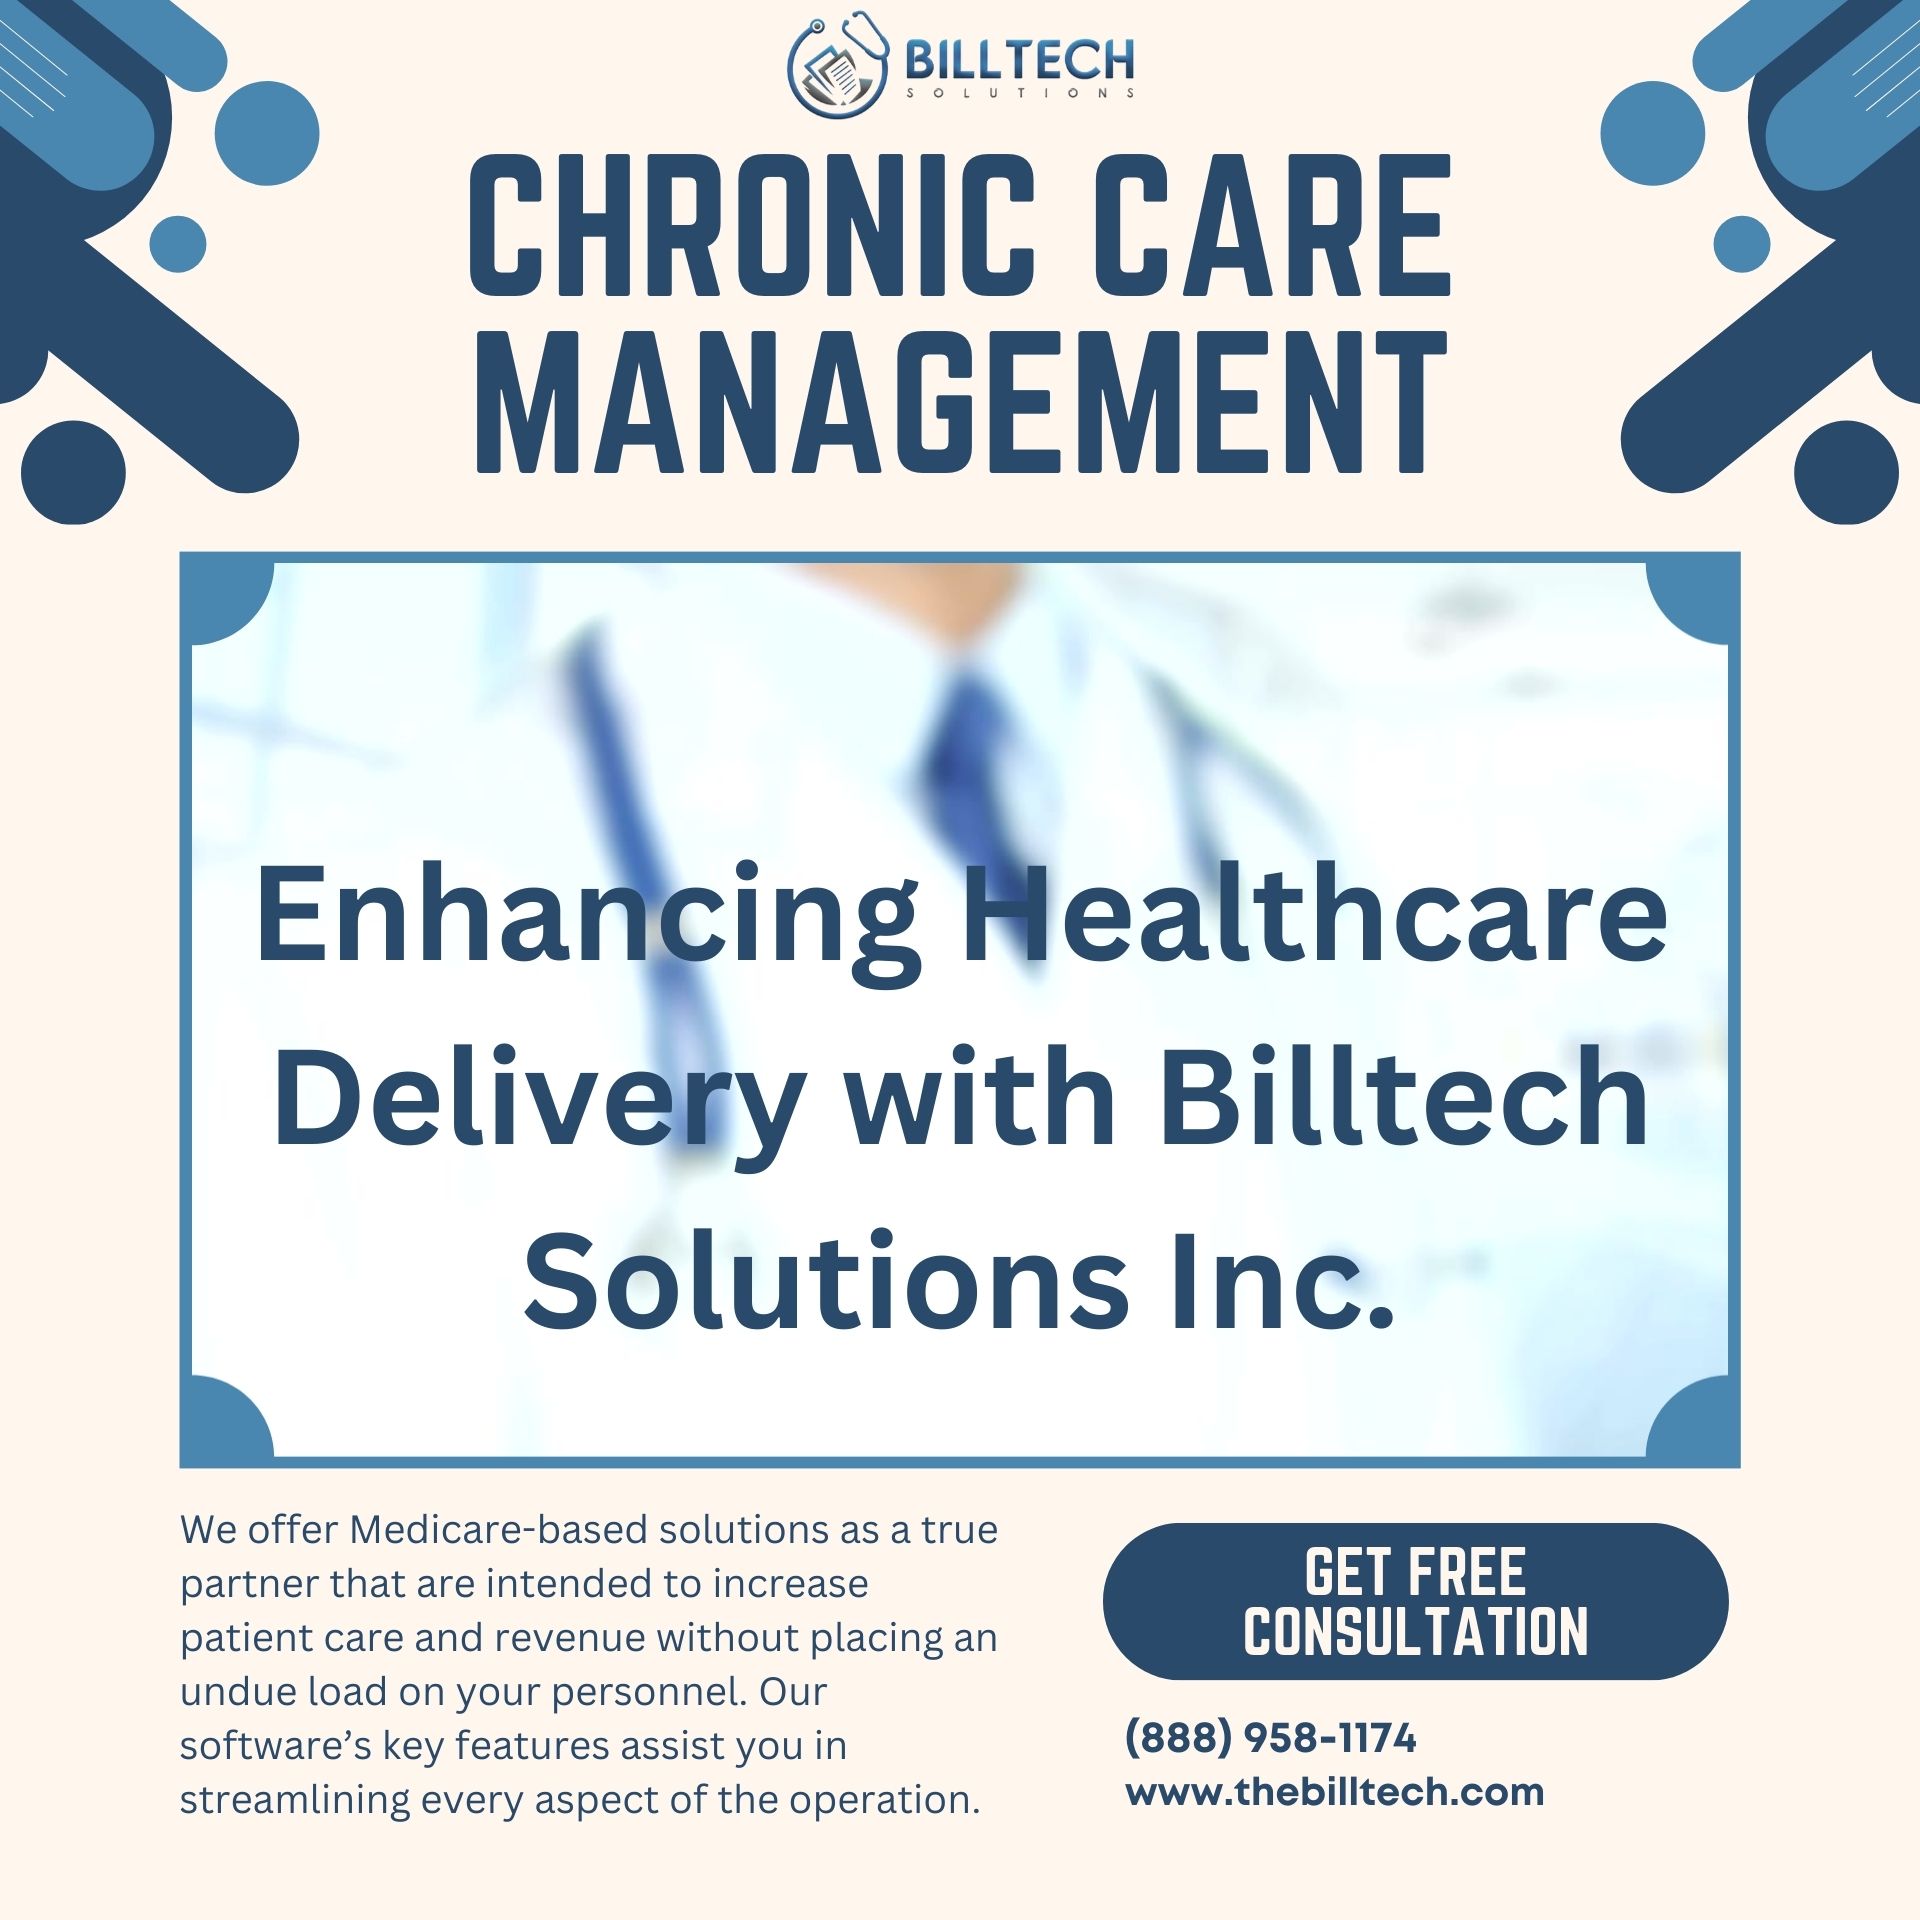 Enhancing Healthcare Delivery with Billtech Solutions Inc